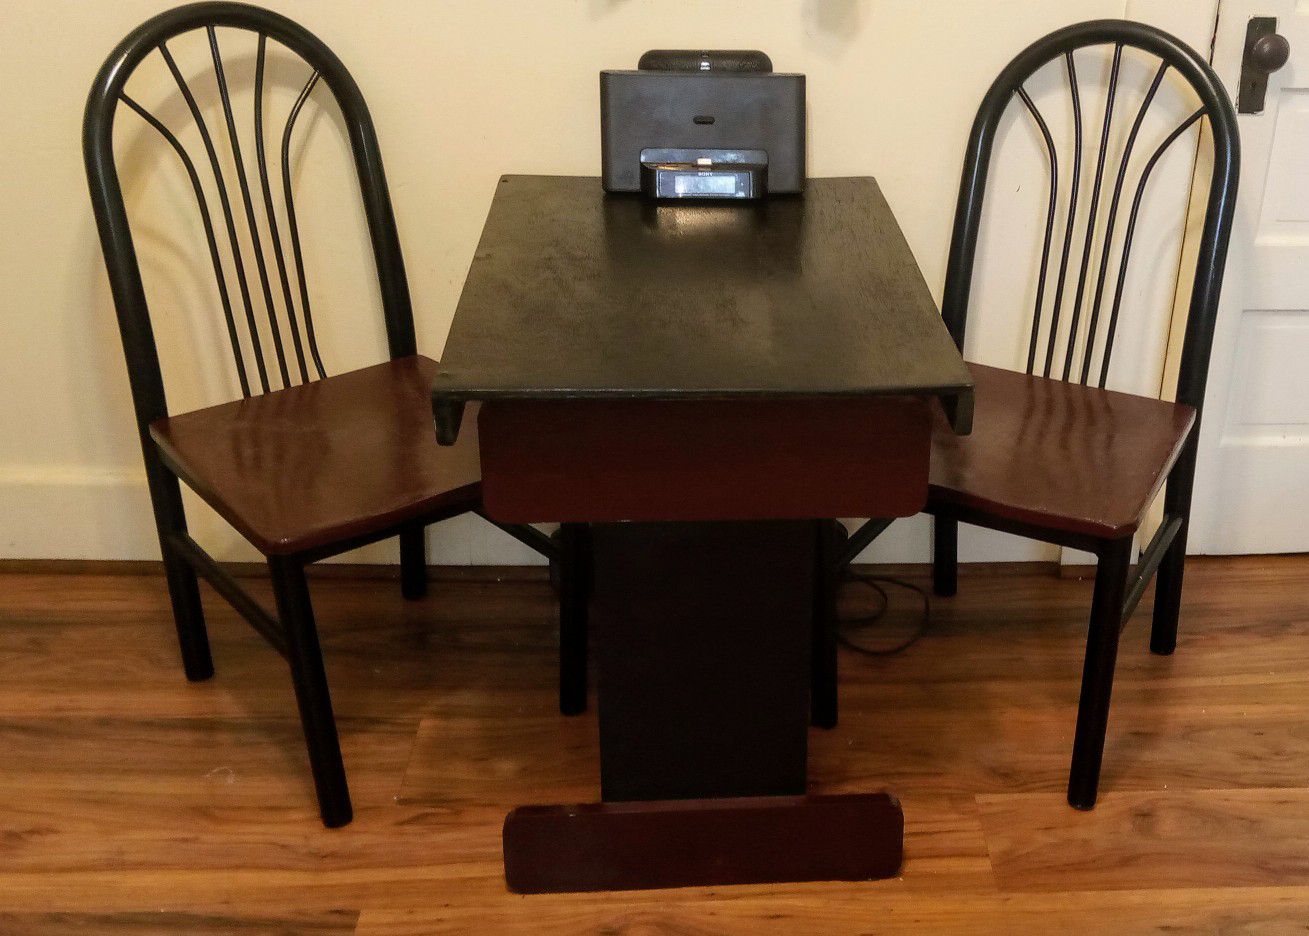 Small table with 2 chairs